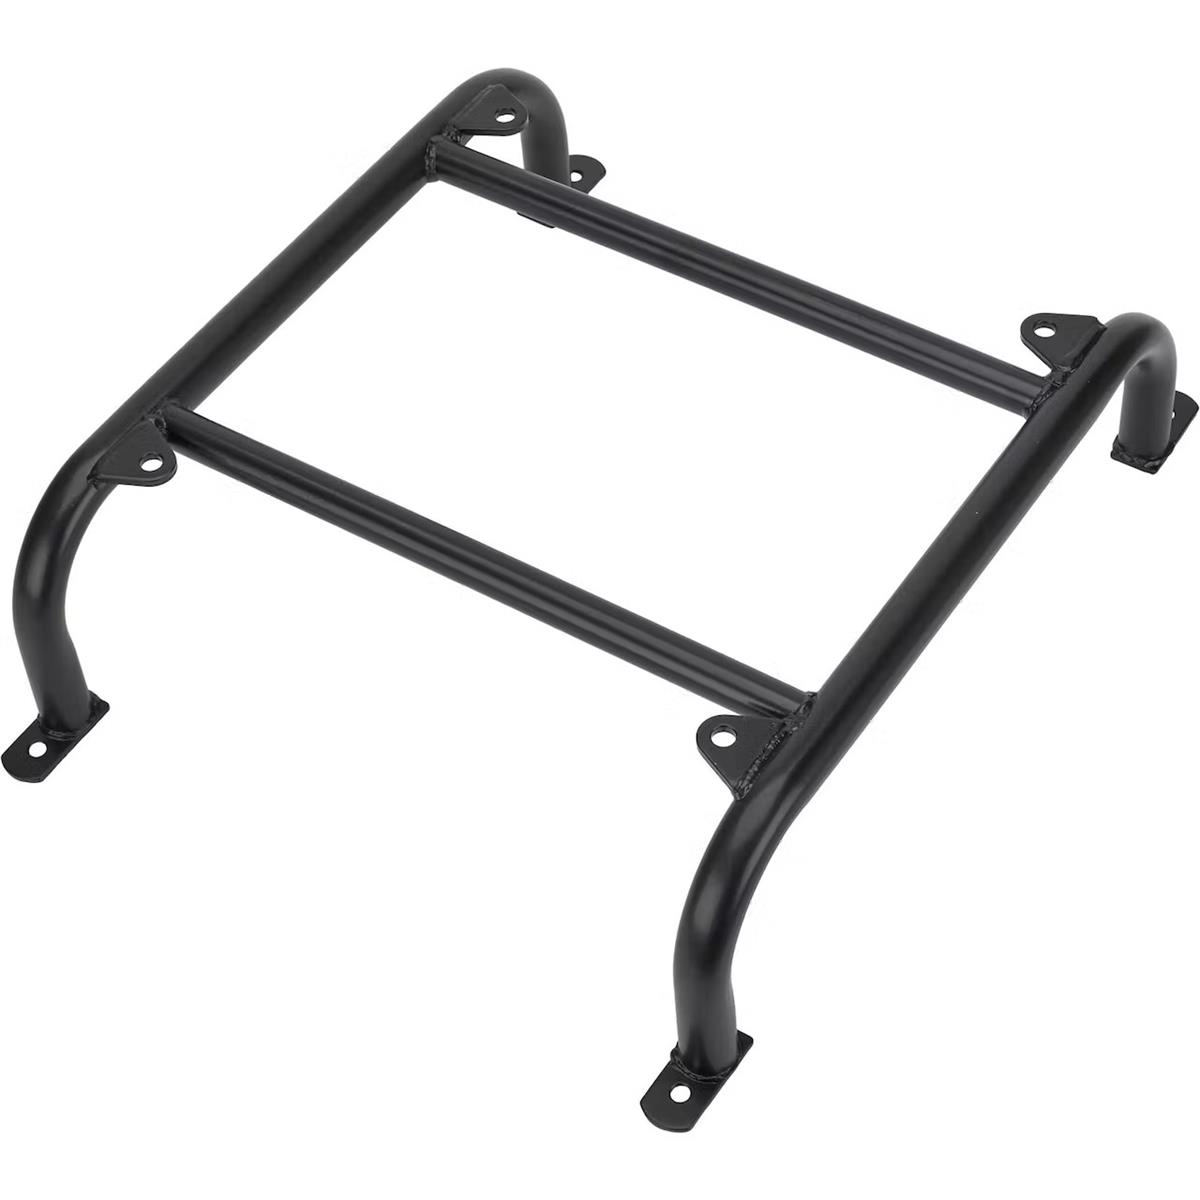 COM-5753 | COM-5753 Universal Seat Mounting Frame with Slider and Mounts Common Application16.jpg